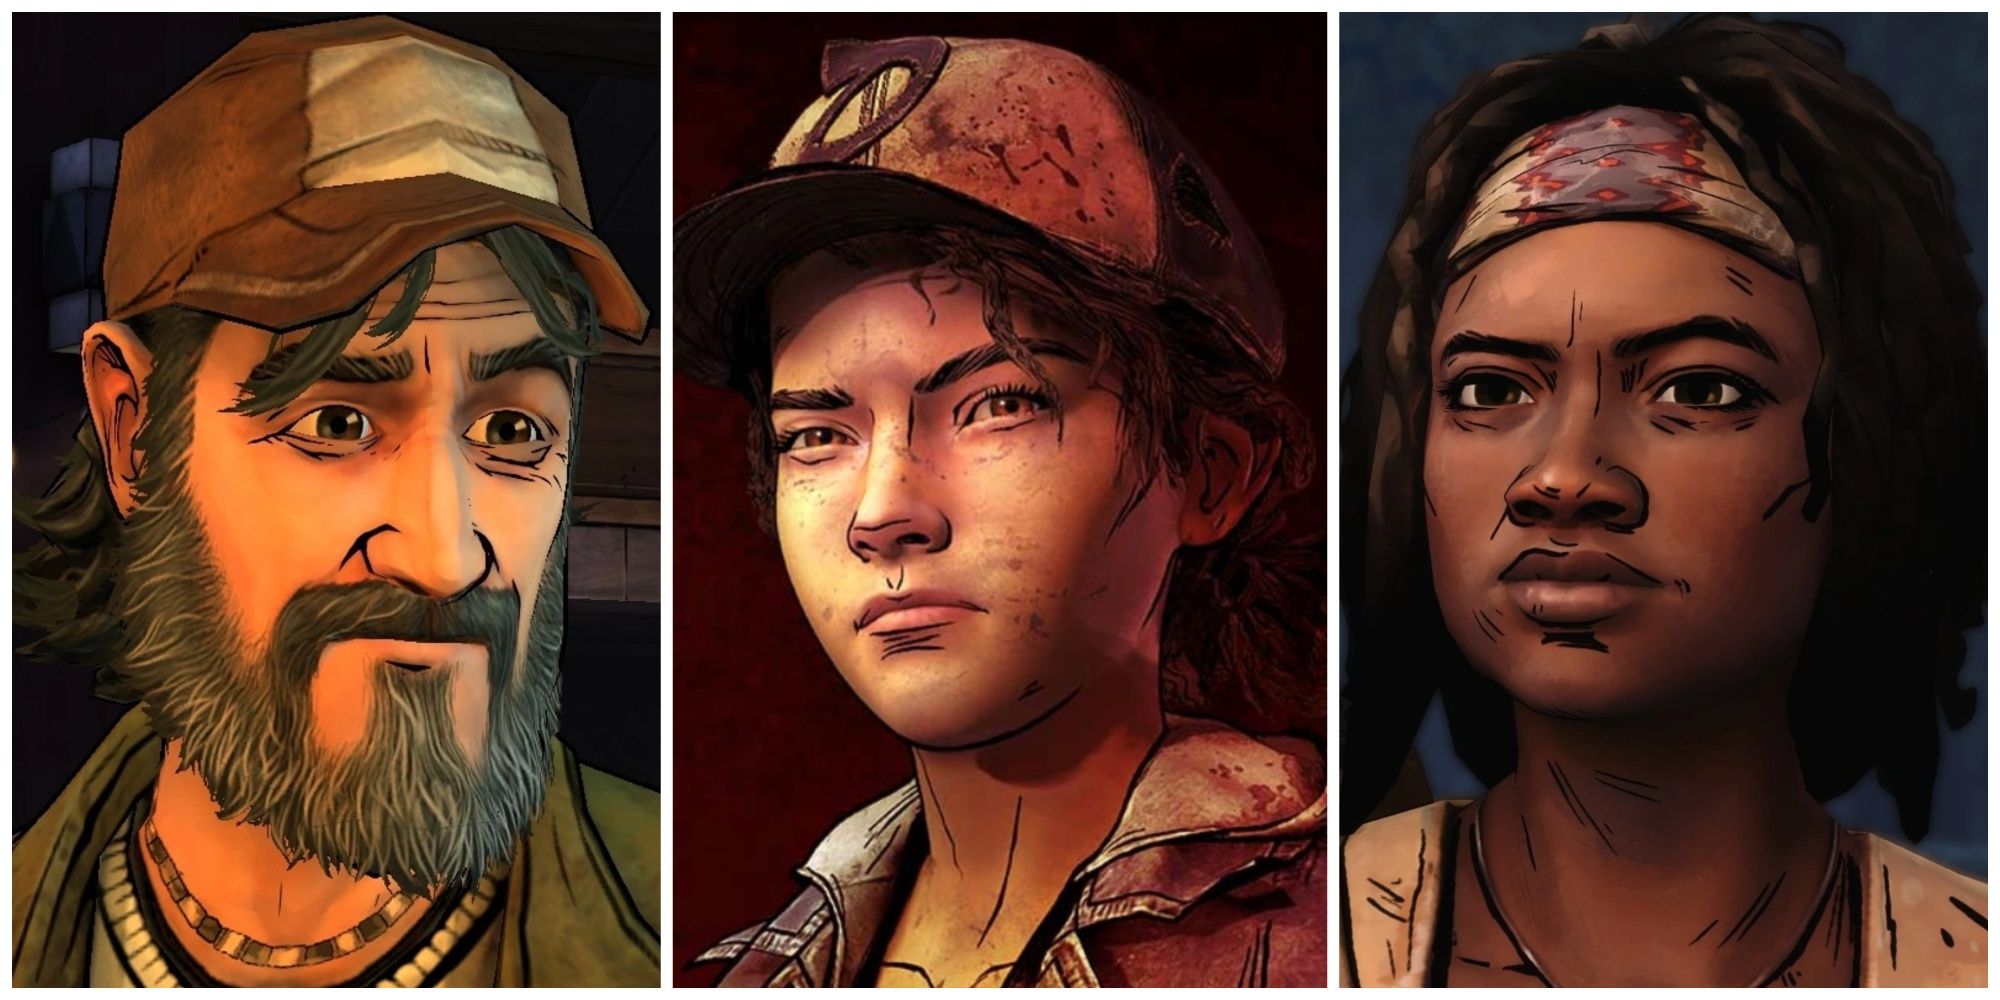 kenny, clementine and Michonne from telltale's the walking dead